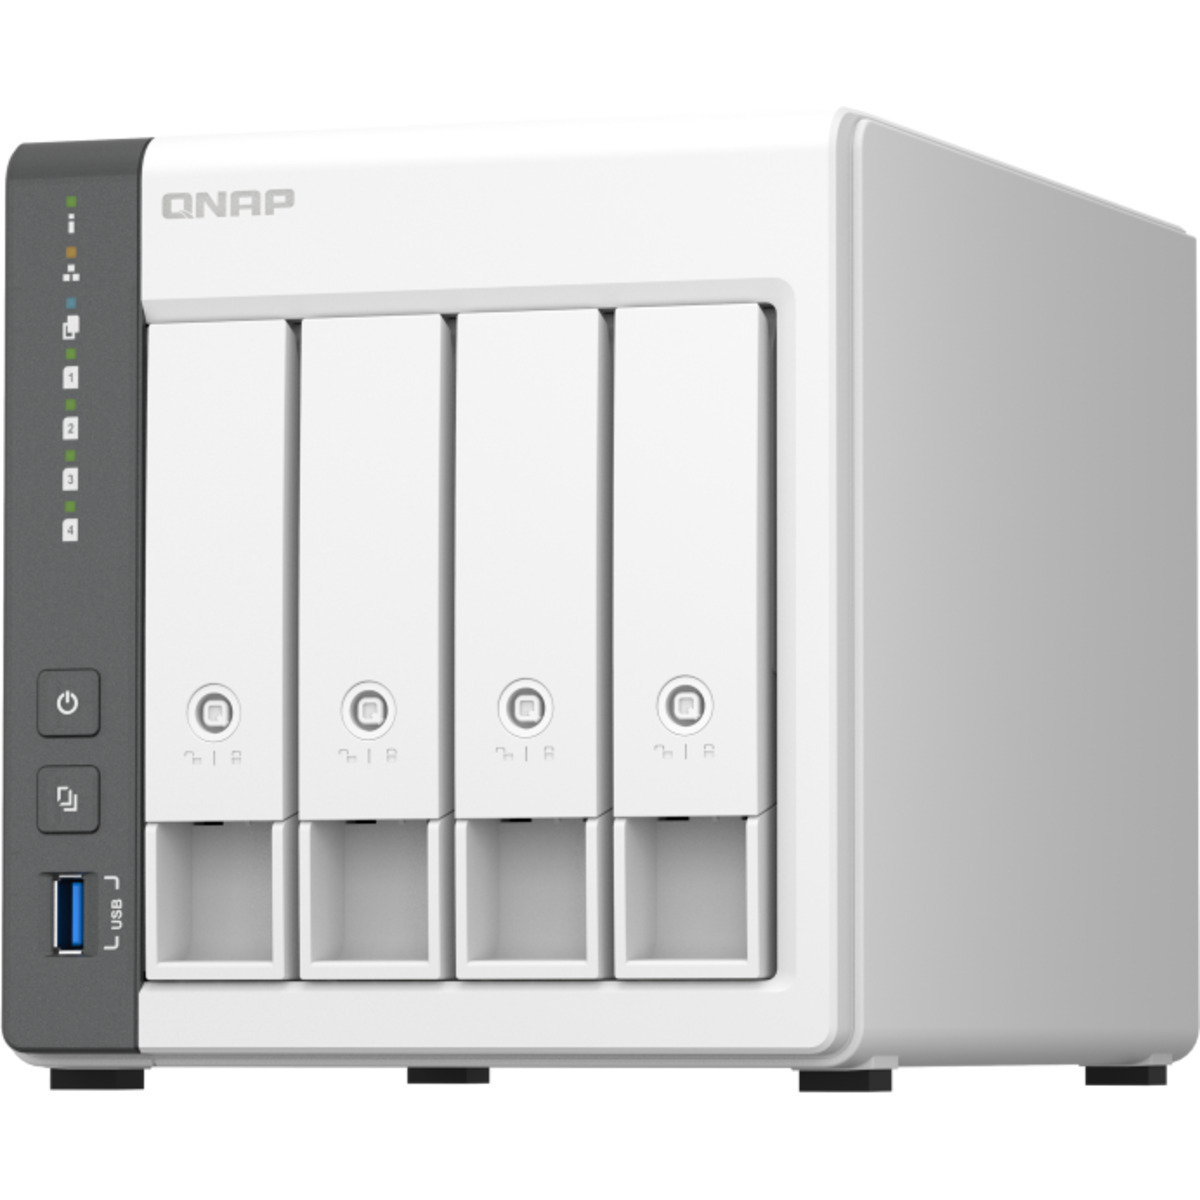 buy QNAP TS-433 24tb Desktop NAS - Network Attached Storage Device 4x6000gb Western Digital Red WD60EFAX 3.5 5400rpm SATA 6Gb/s HDD NAS Class Drives Installed - Burn-In Tested - ON SALE - nas headquarters buy network attached storage server device das new raid-5 free shipping simply usa TS-433